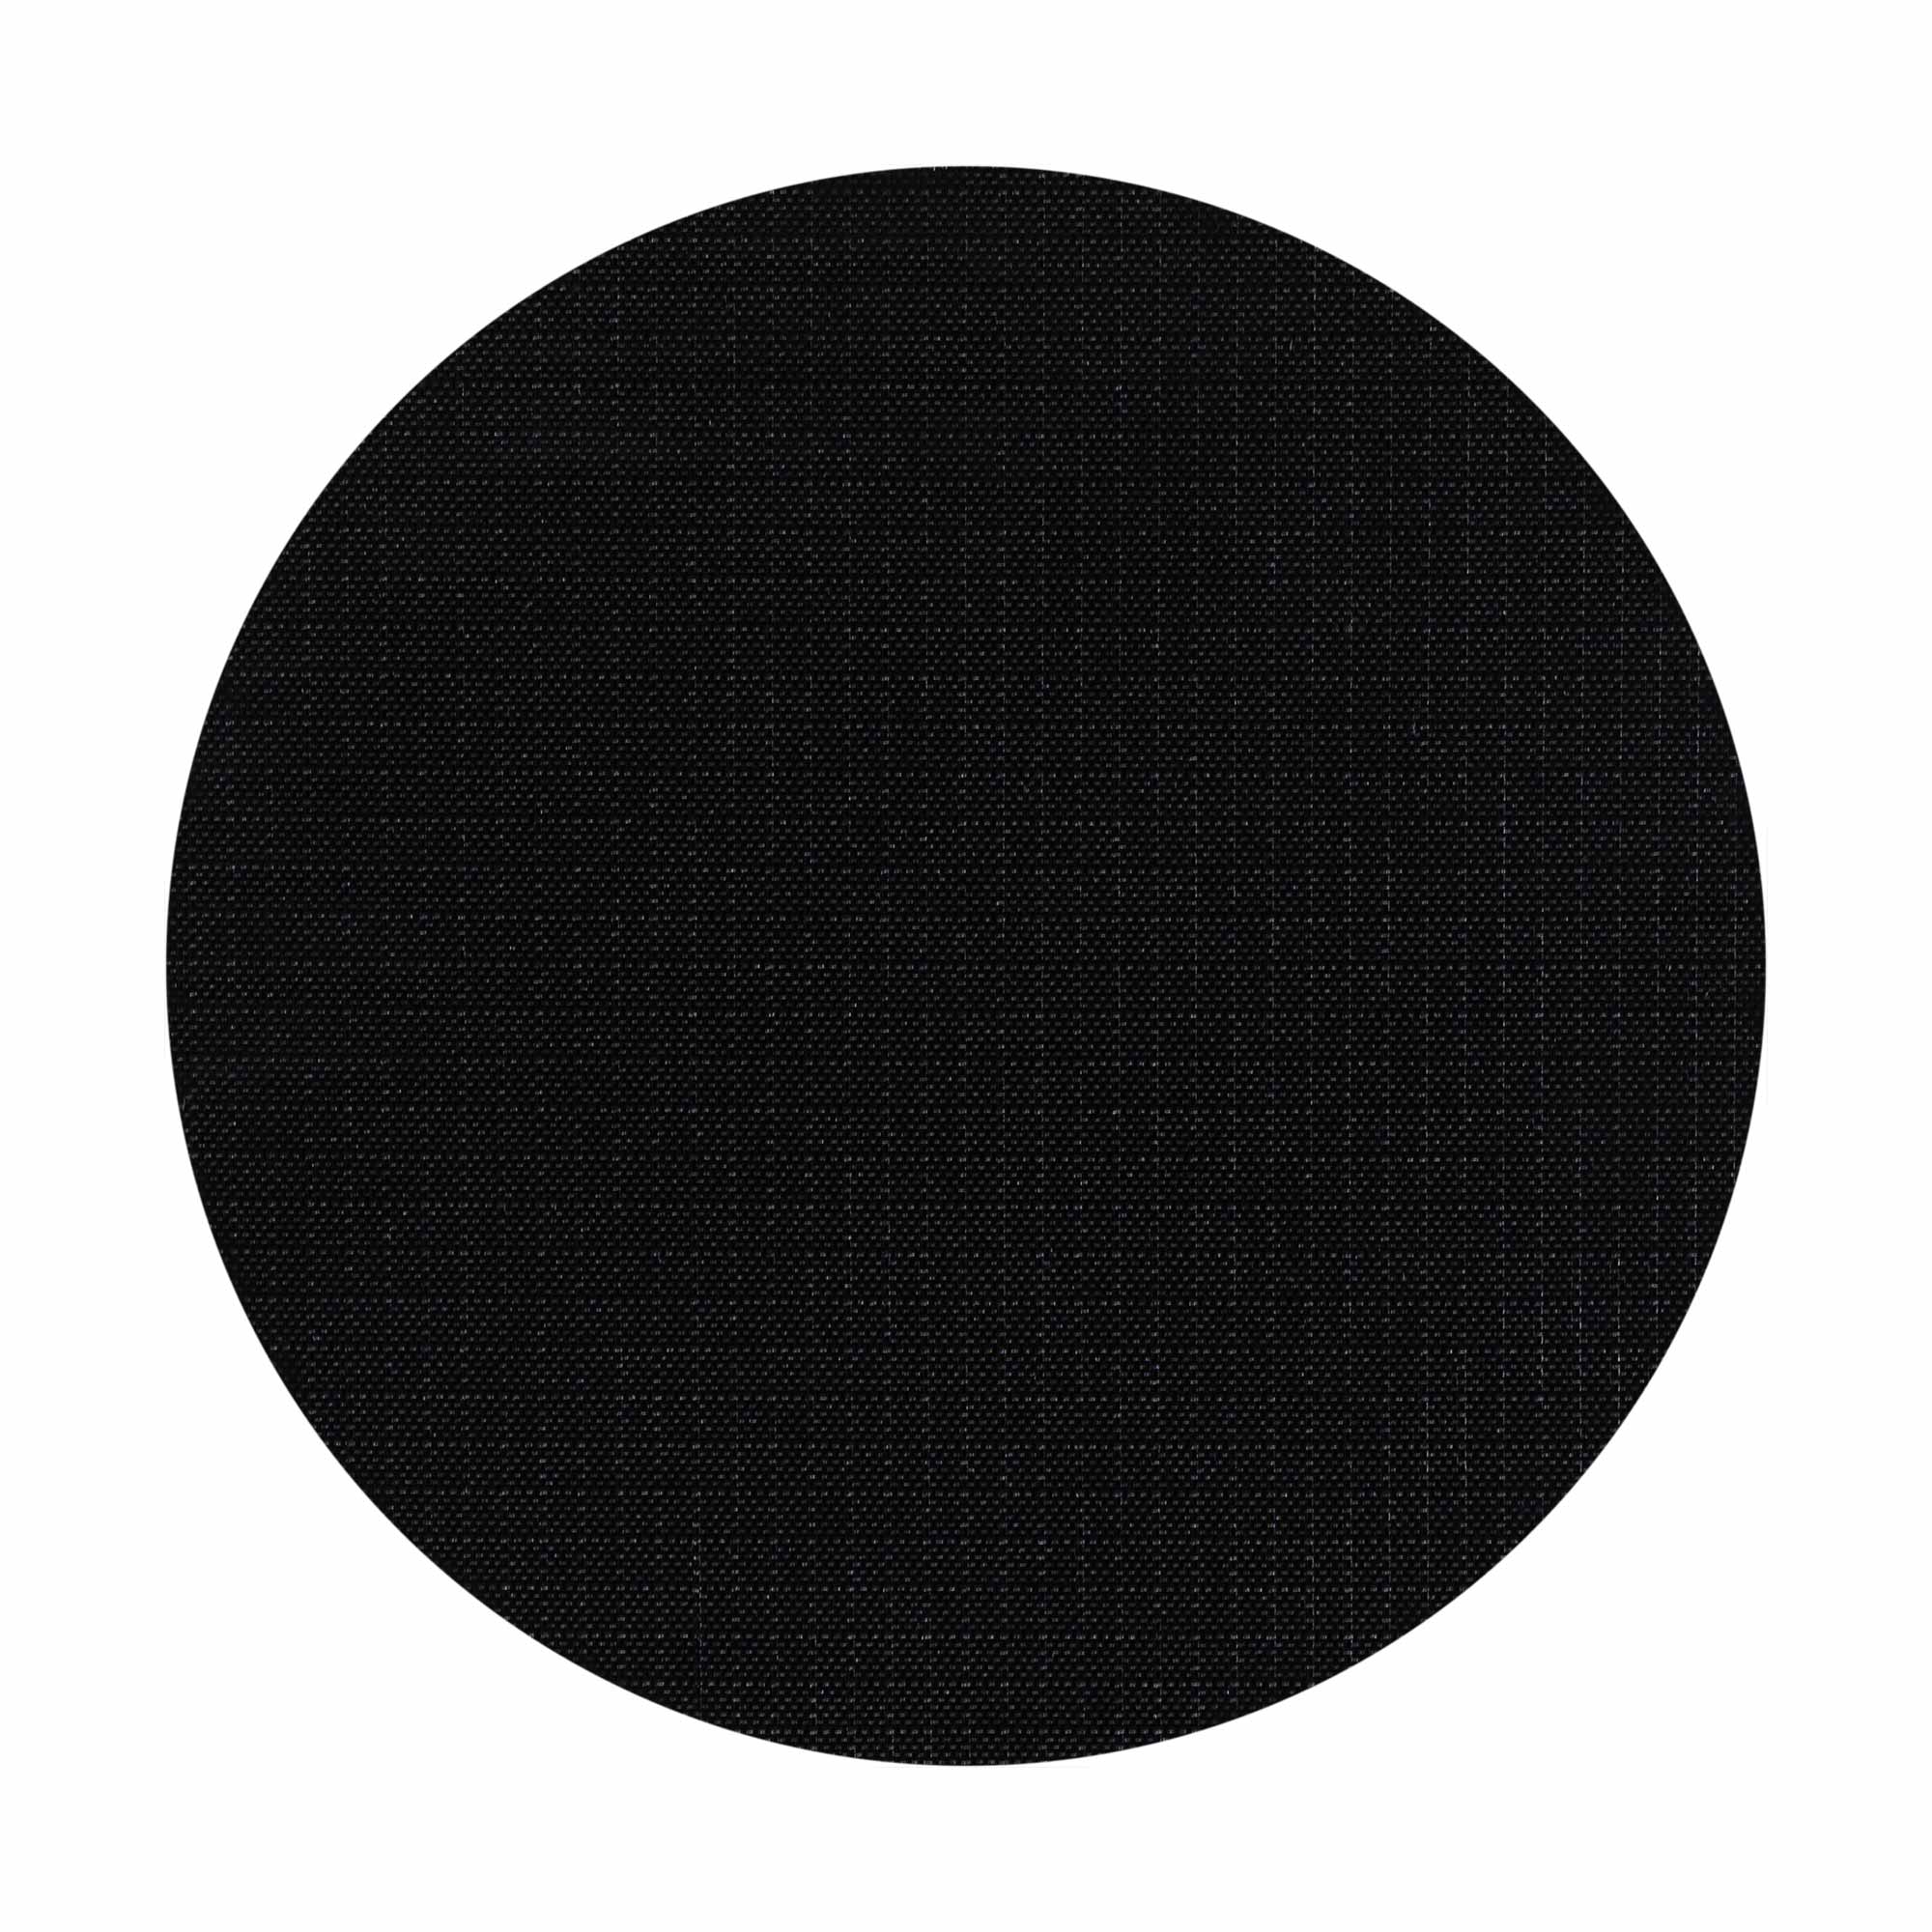  Black 420 Denier Coated Pack Cloth Fabric - by The